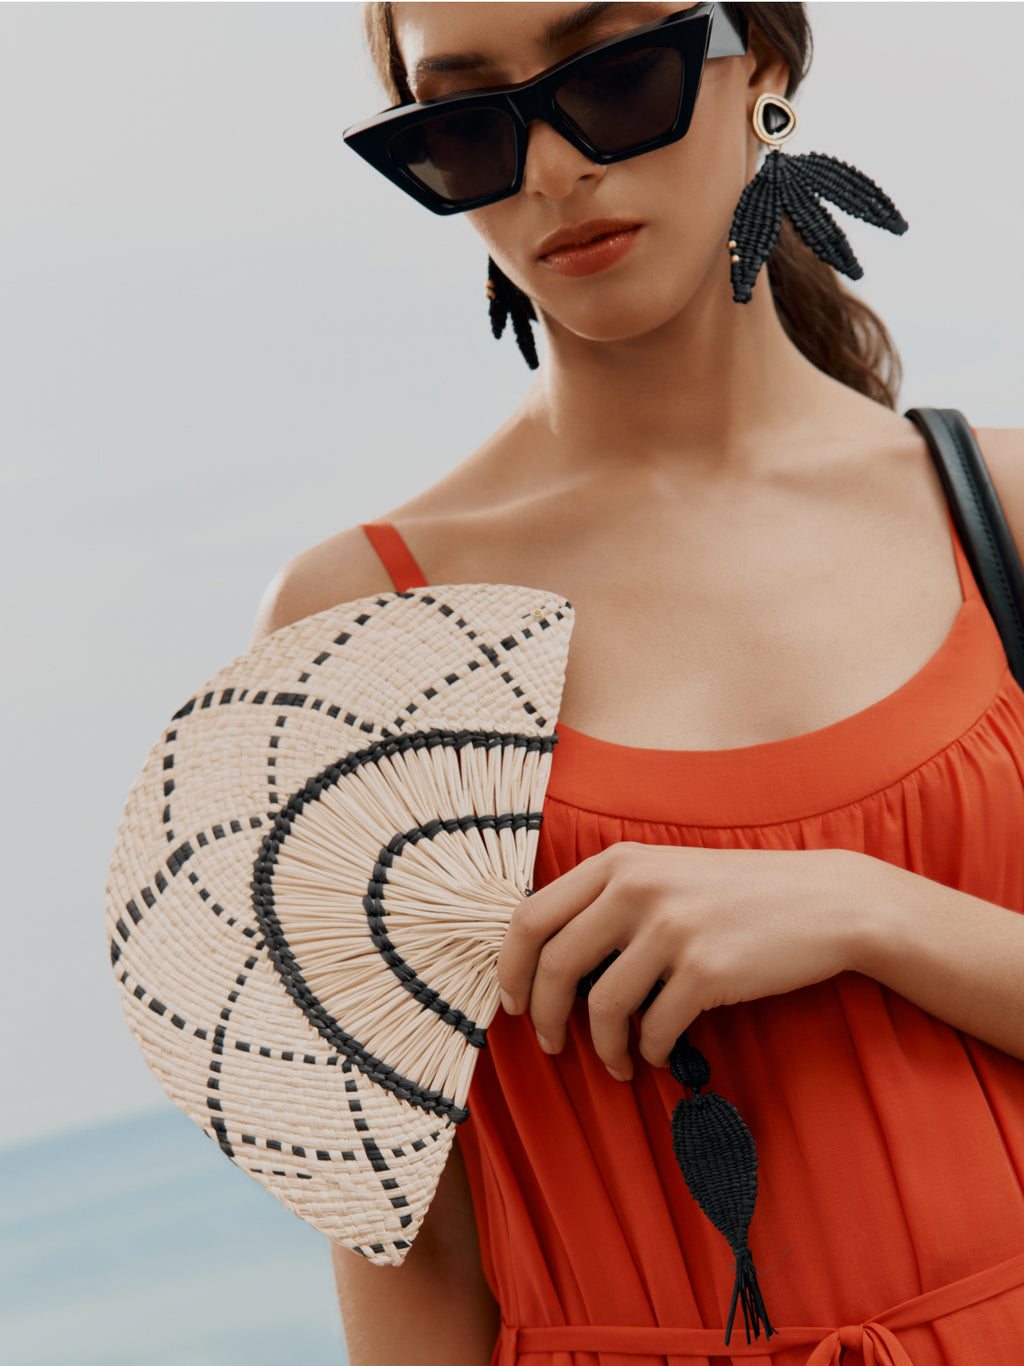 Woman holding a hand fan, wearing large sunglasses and earrings, with a relaxed outfit.